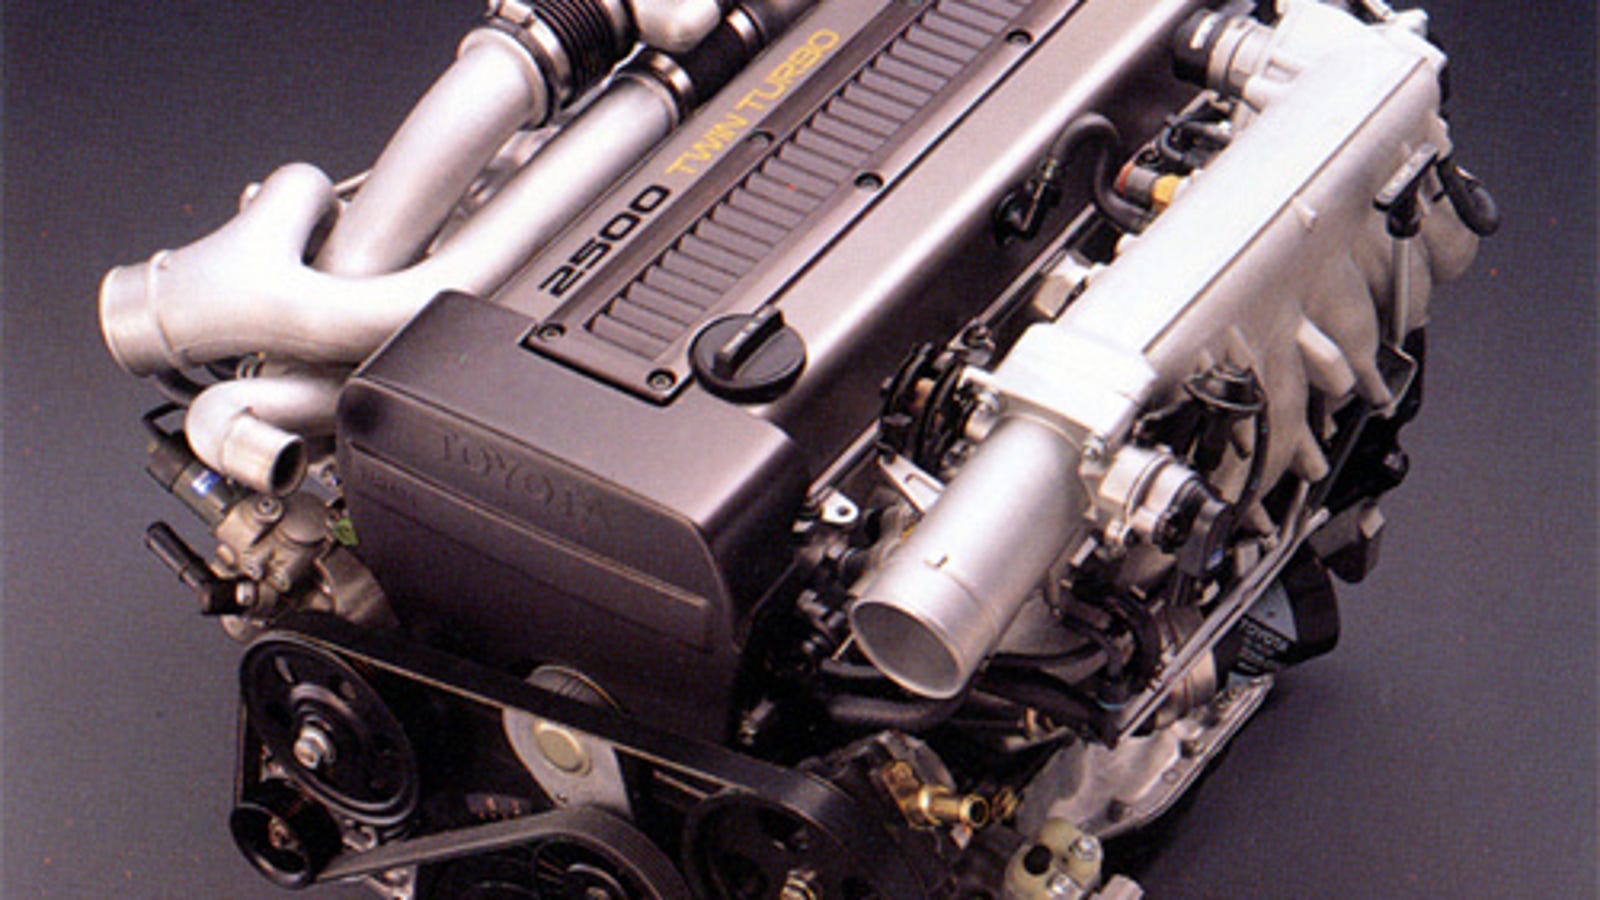 Engine Of The Day: Toyota JZ